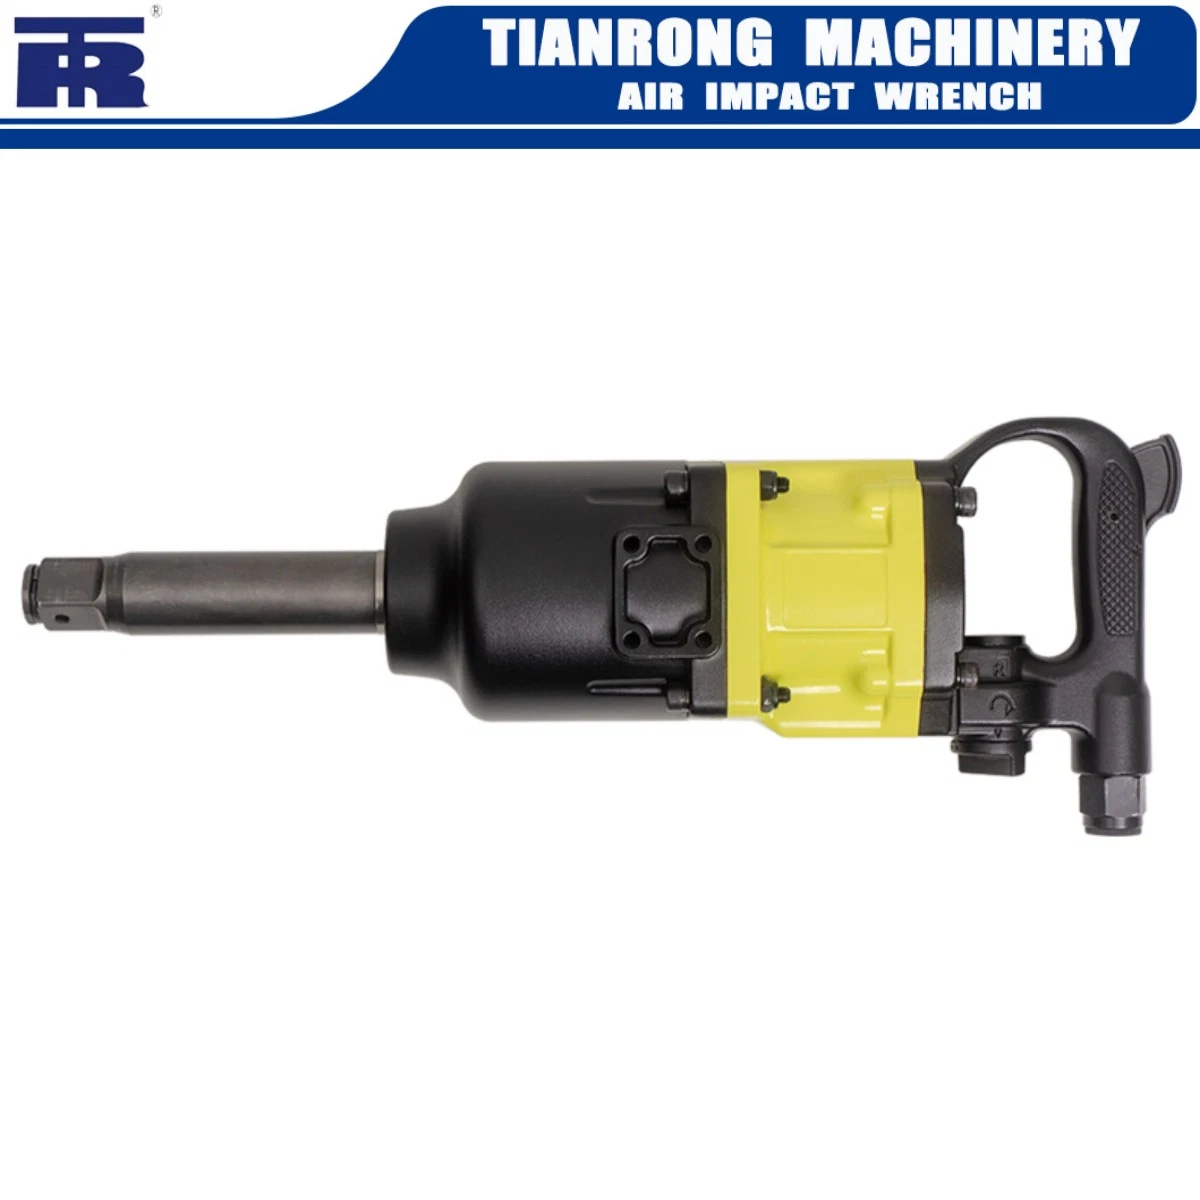 1 Inch Pneumatic Tool, Air Tool, Heavy Duty, Suitable for Truck Tire, Pipe Piles, Railway Track, Pinless Hammer, Power Tool, High Torque